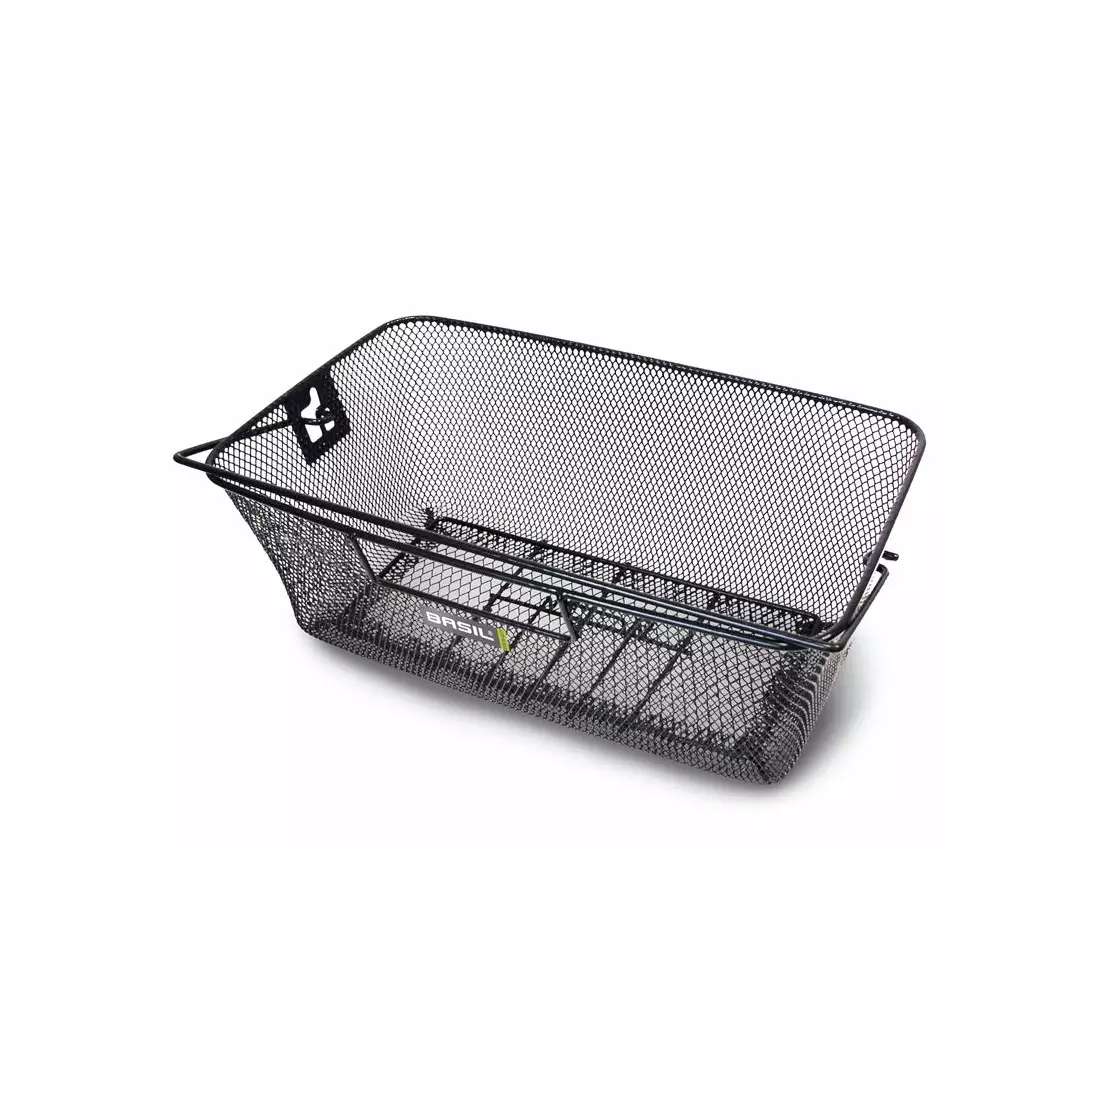 BASIL CONCORD bicycle basket for the rear carrier + fixing hooks, steel black (DWZ) BAS-11037